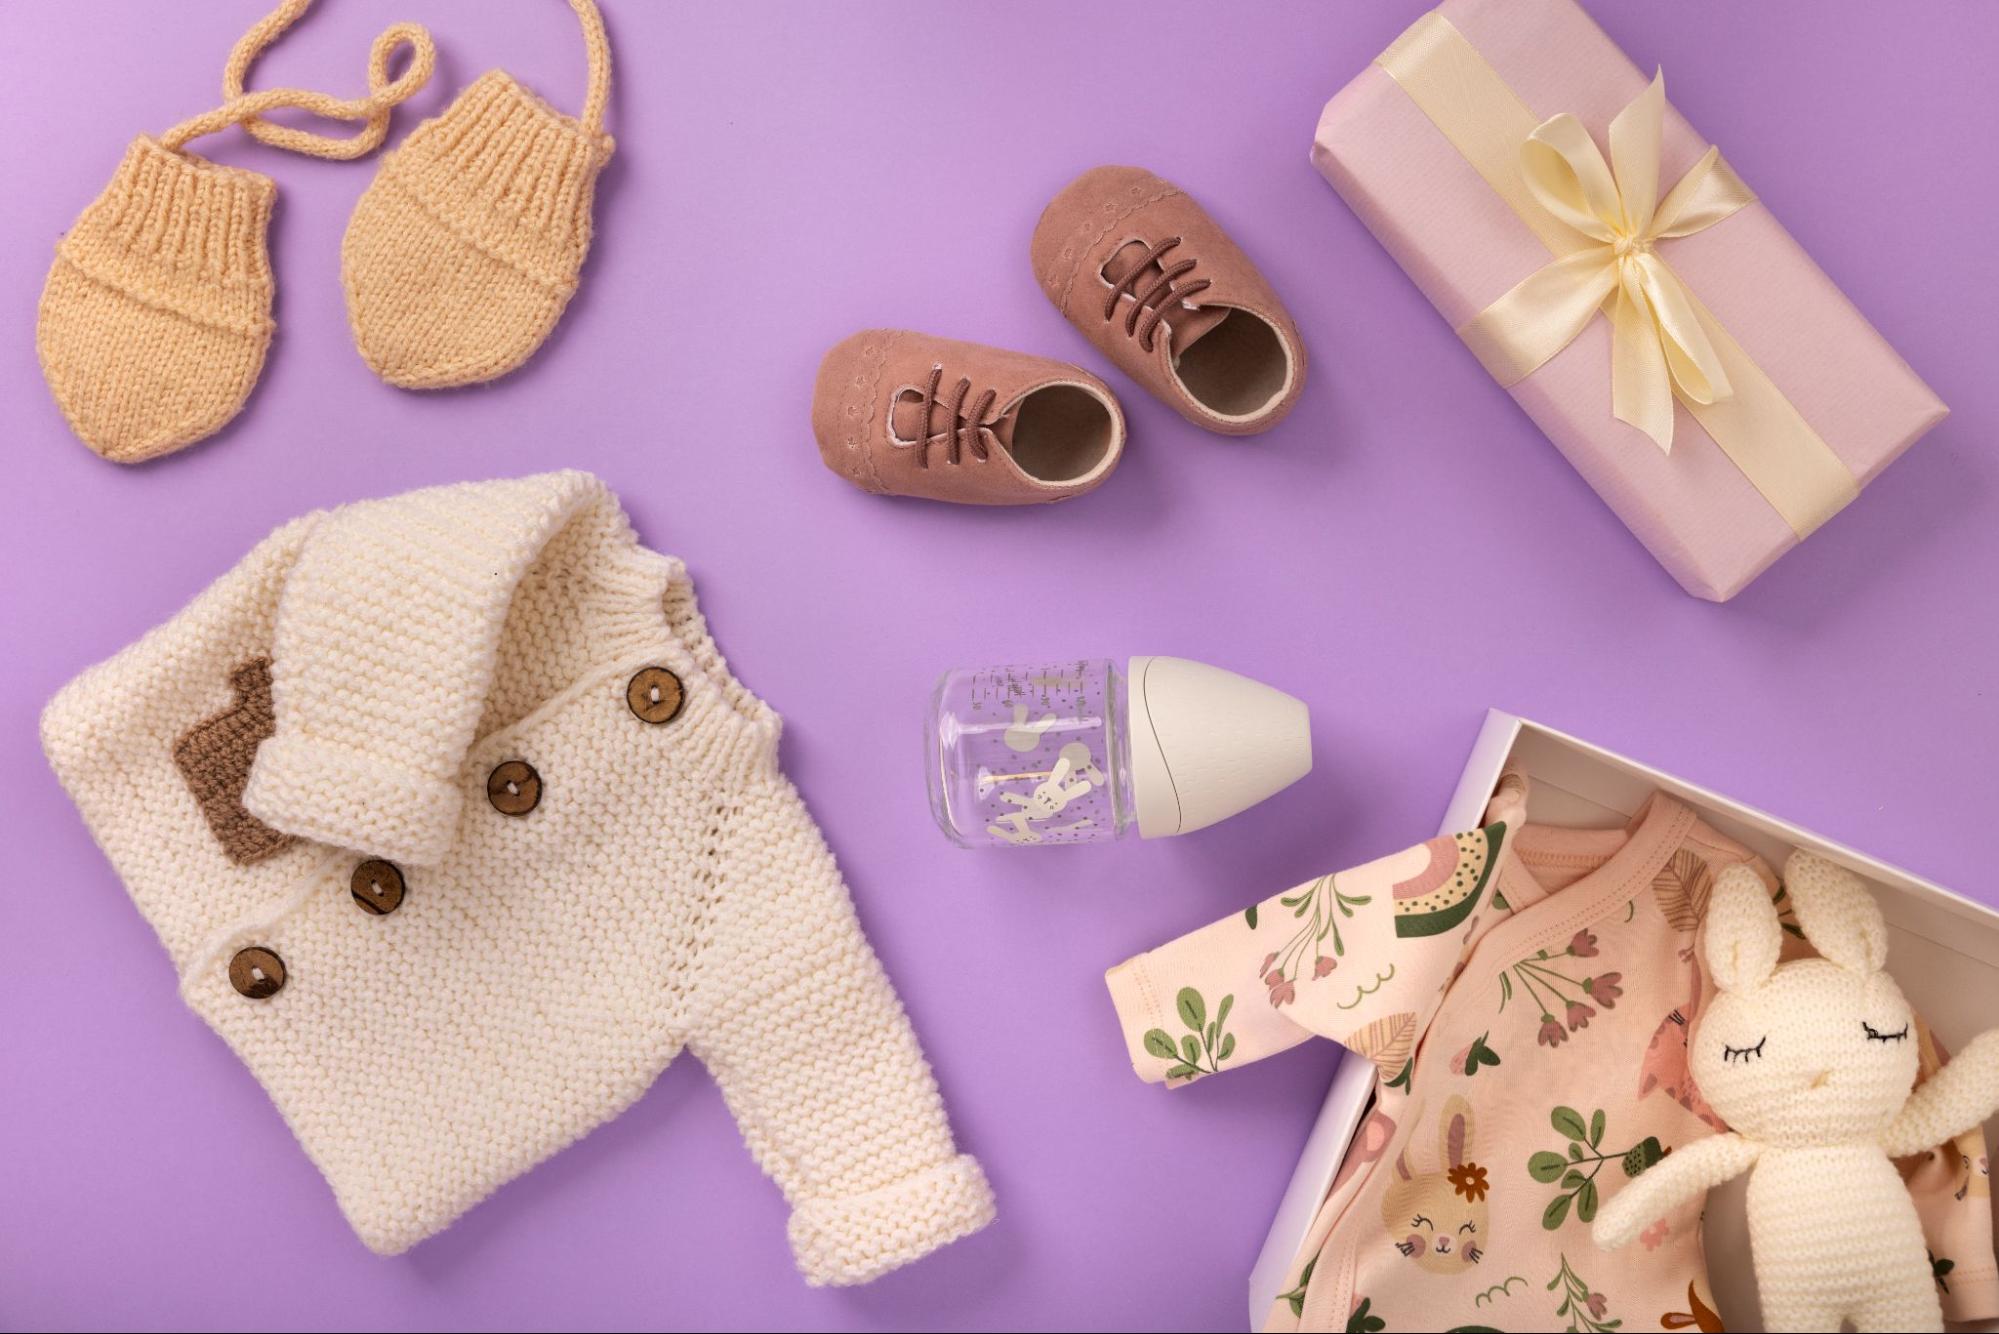 Baby knitwear and gifts on purple background, baby shower ideas.